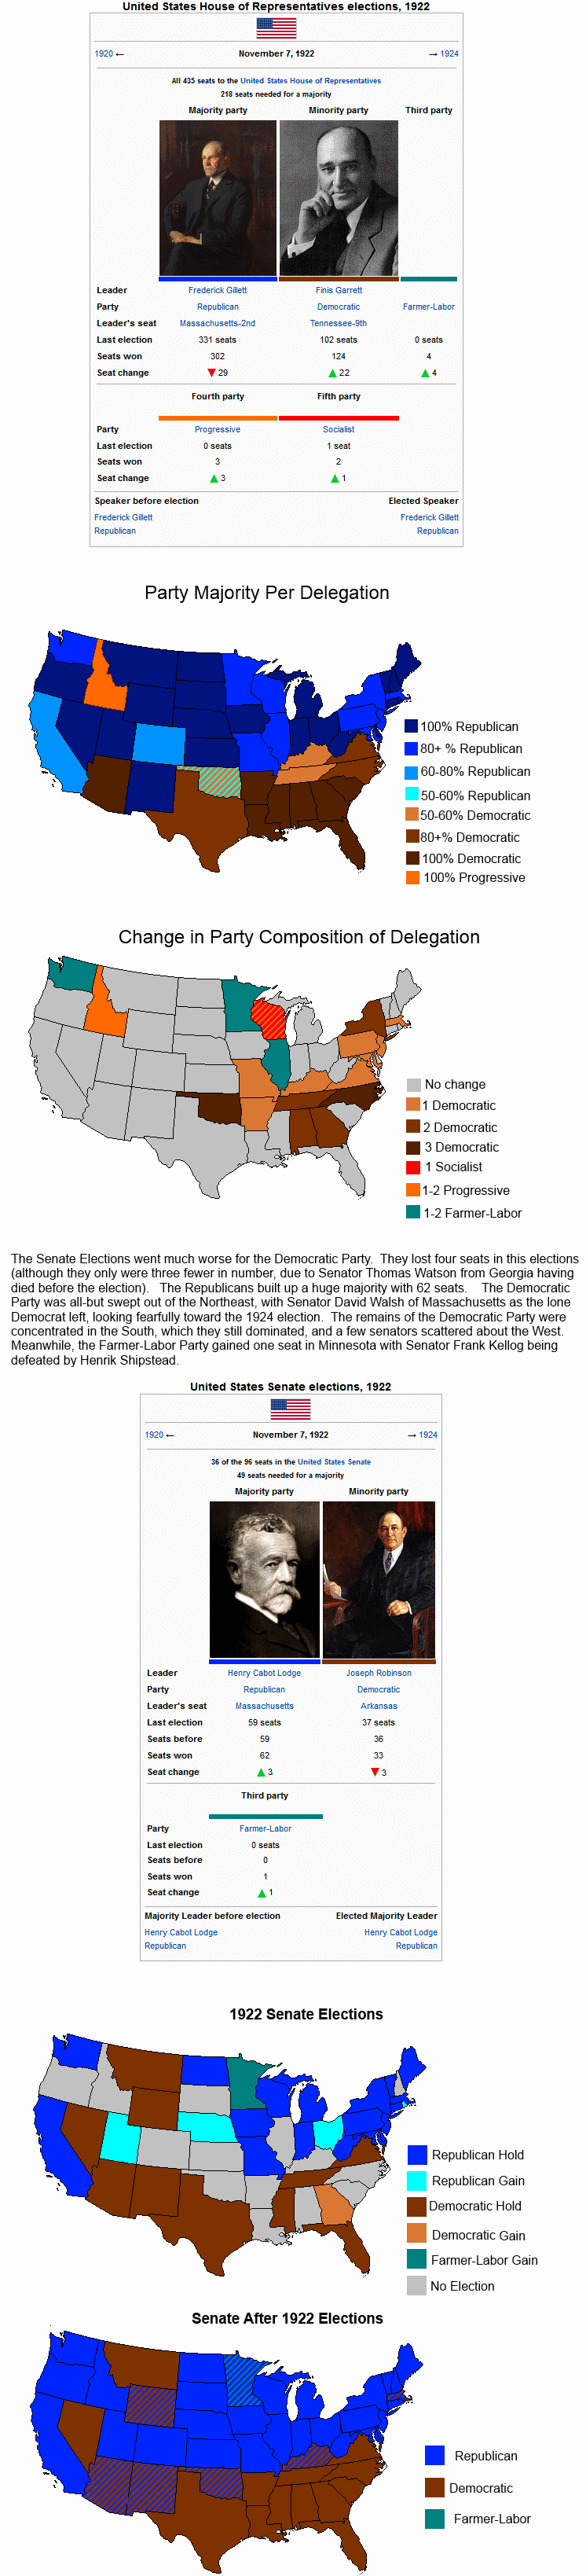 United States House of Representatives Election 1922.png